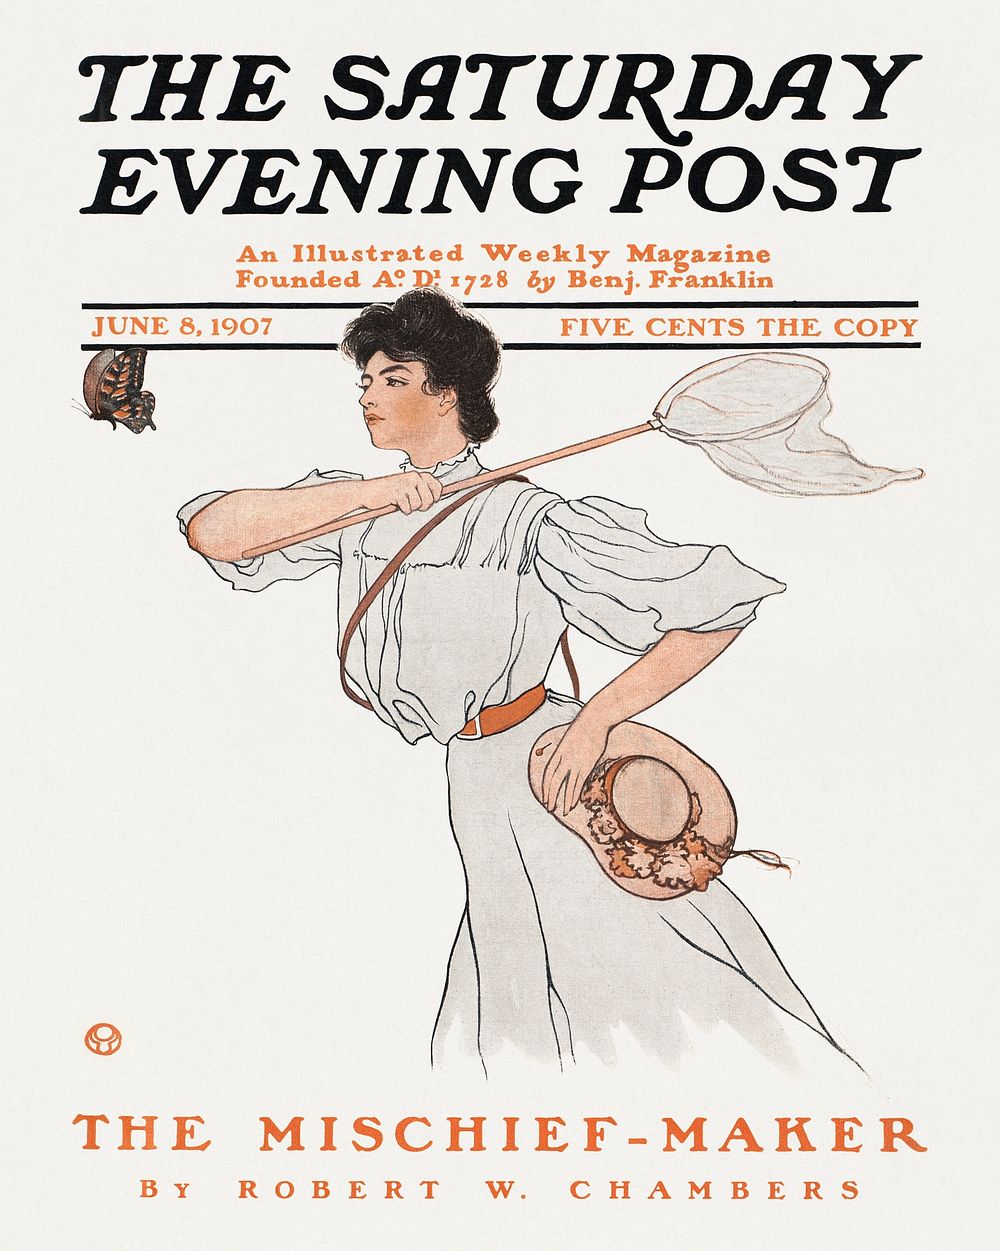 The Saturday evening post (June 8, 1907) chromolithograph art by Edward Penfield. Original public domain image from Digital…